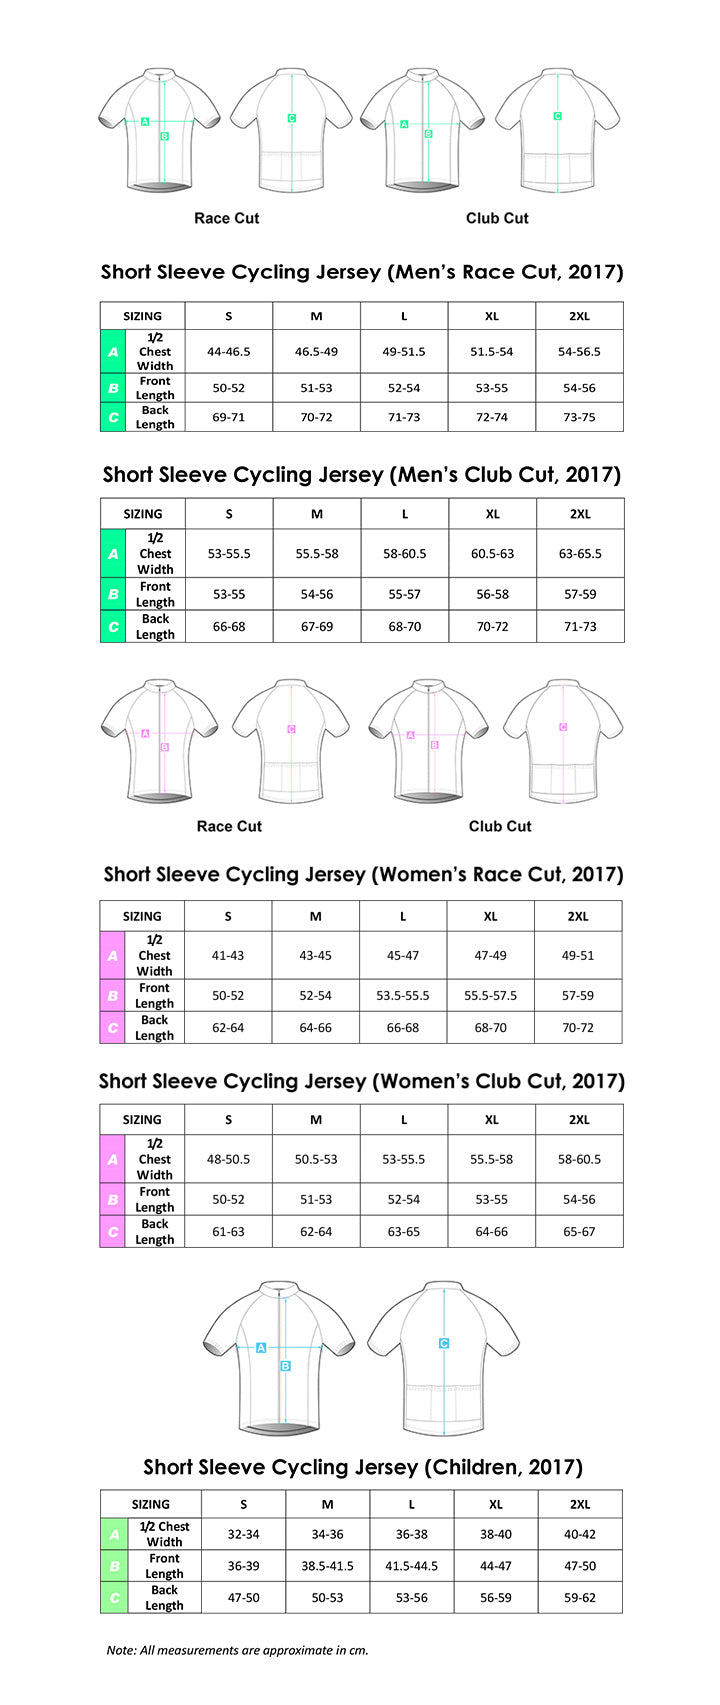 Linked Cycling SS Cycling Jersey Green